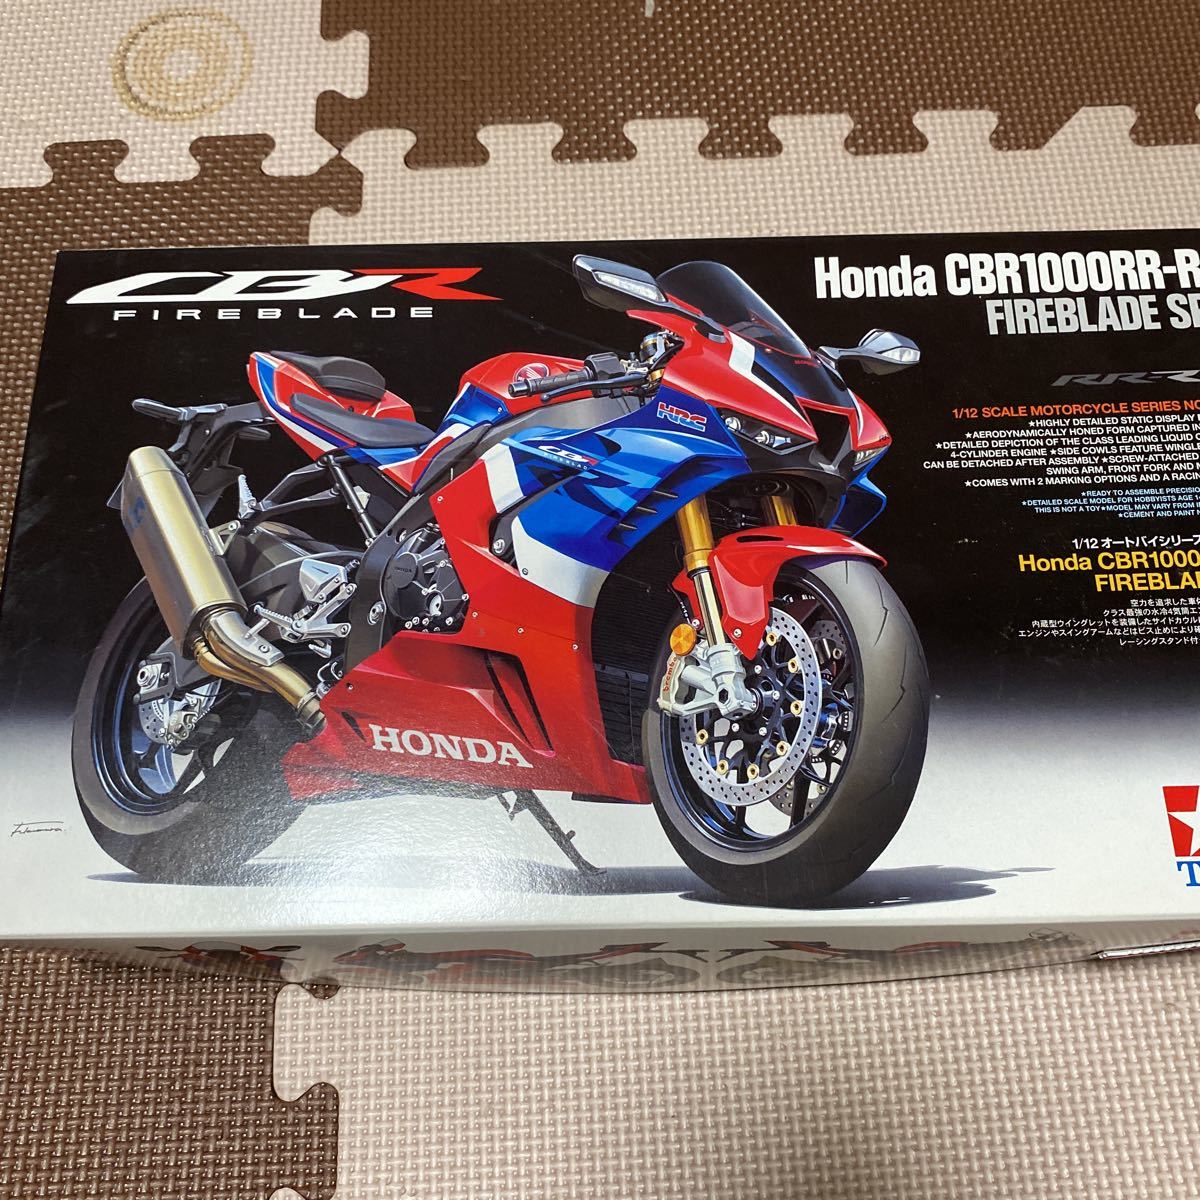  Tamiya 1/12 motorcycle series No.138 Honda CBR 1000RR-R FIREBLADE SP 14138 not yet constructed +ti tail up parts front fork 